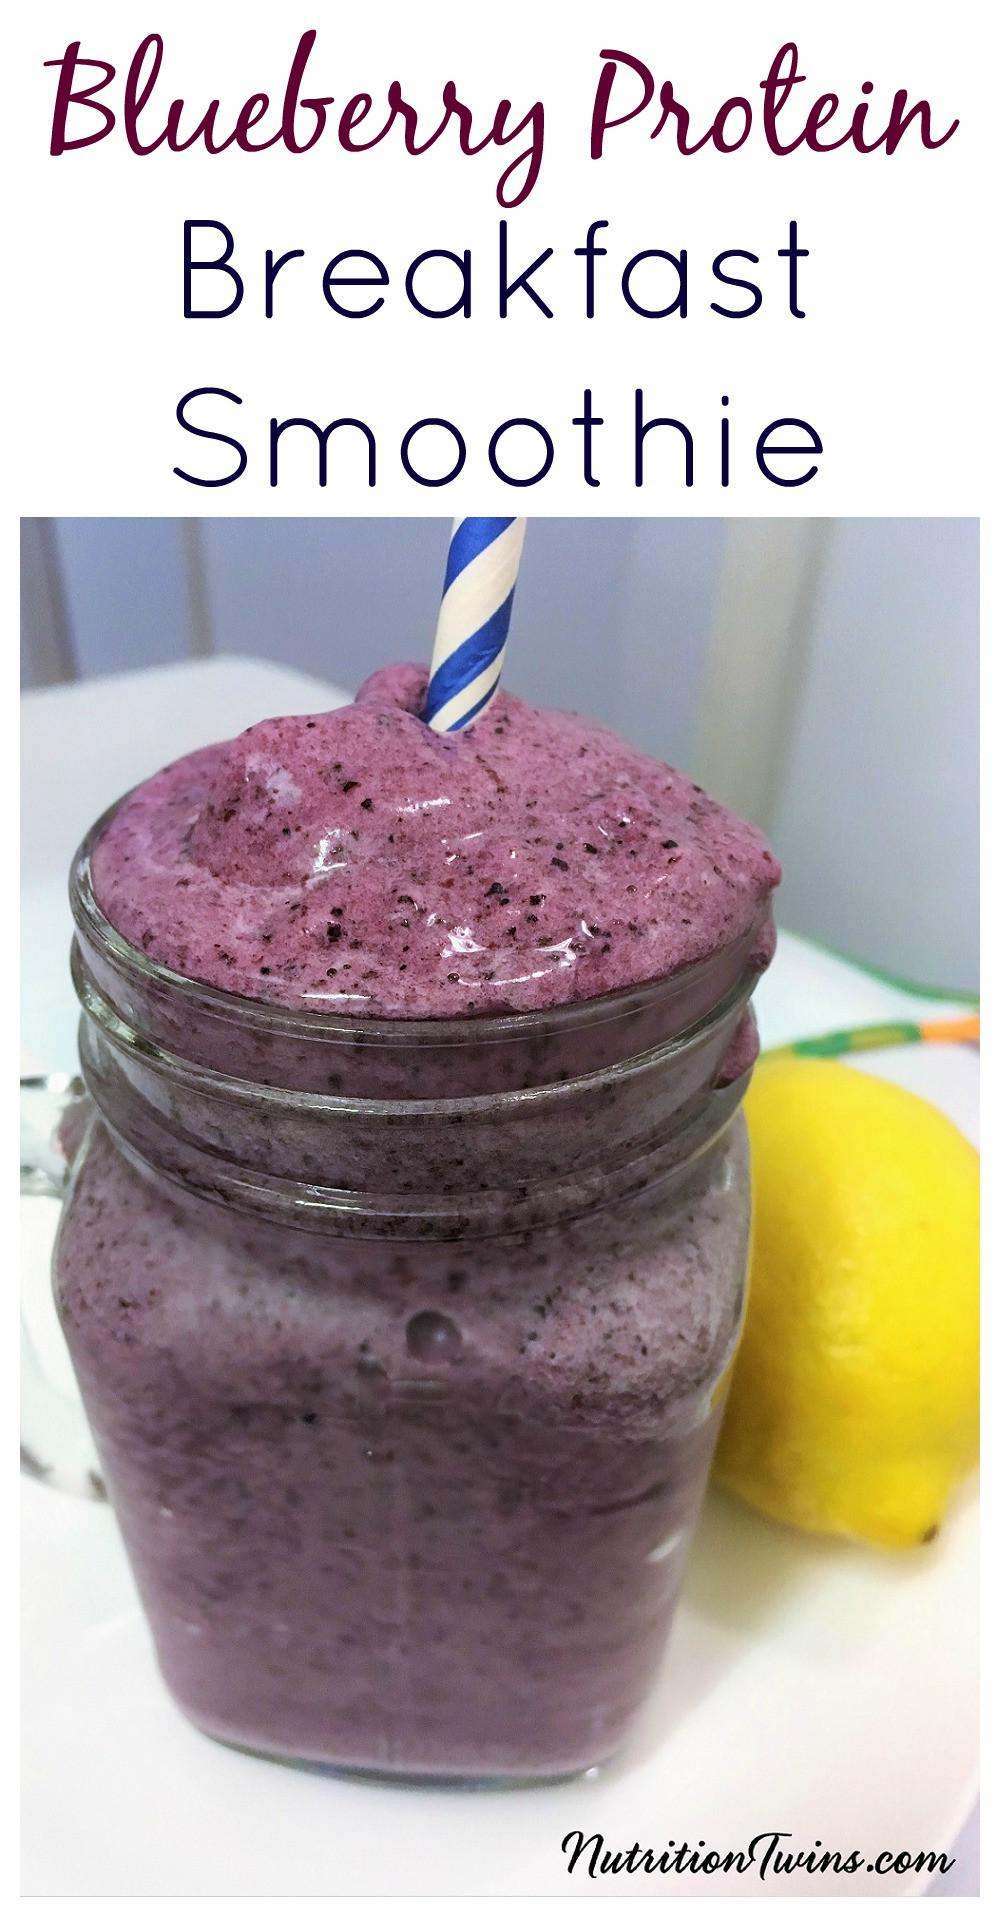 Breakfast Protein Smoothies
 Blueberry Protein Weight Loss Breakfast Smoothie